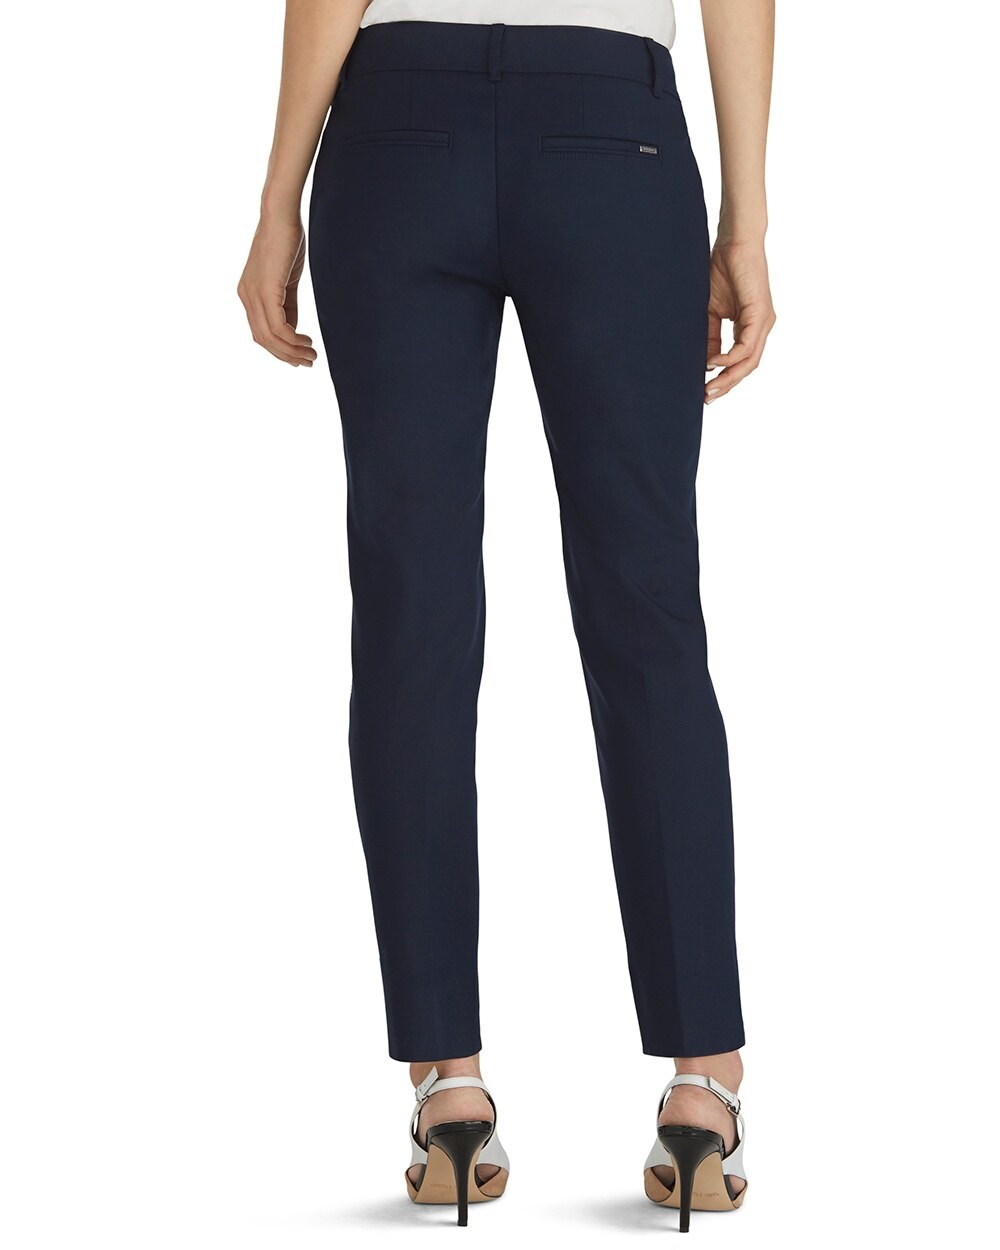 Curvy Perfect Form Navy Ankle Pants - White House Black Market